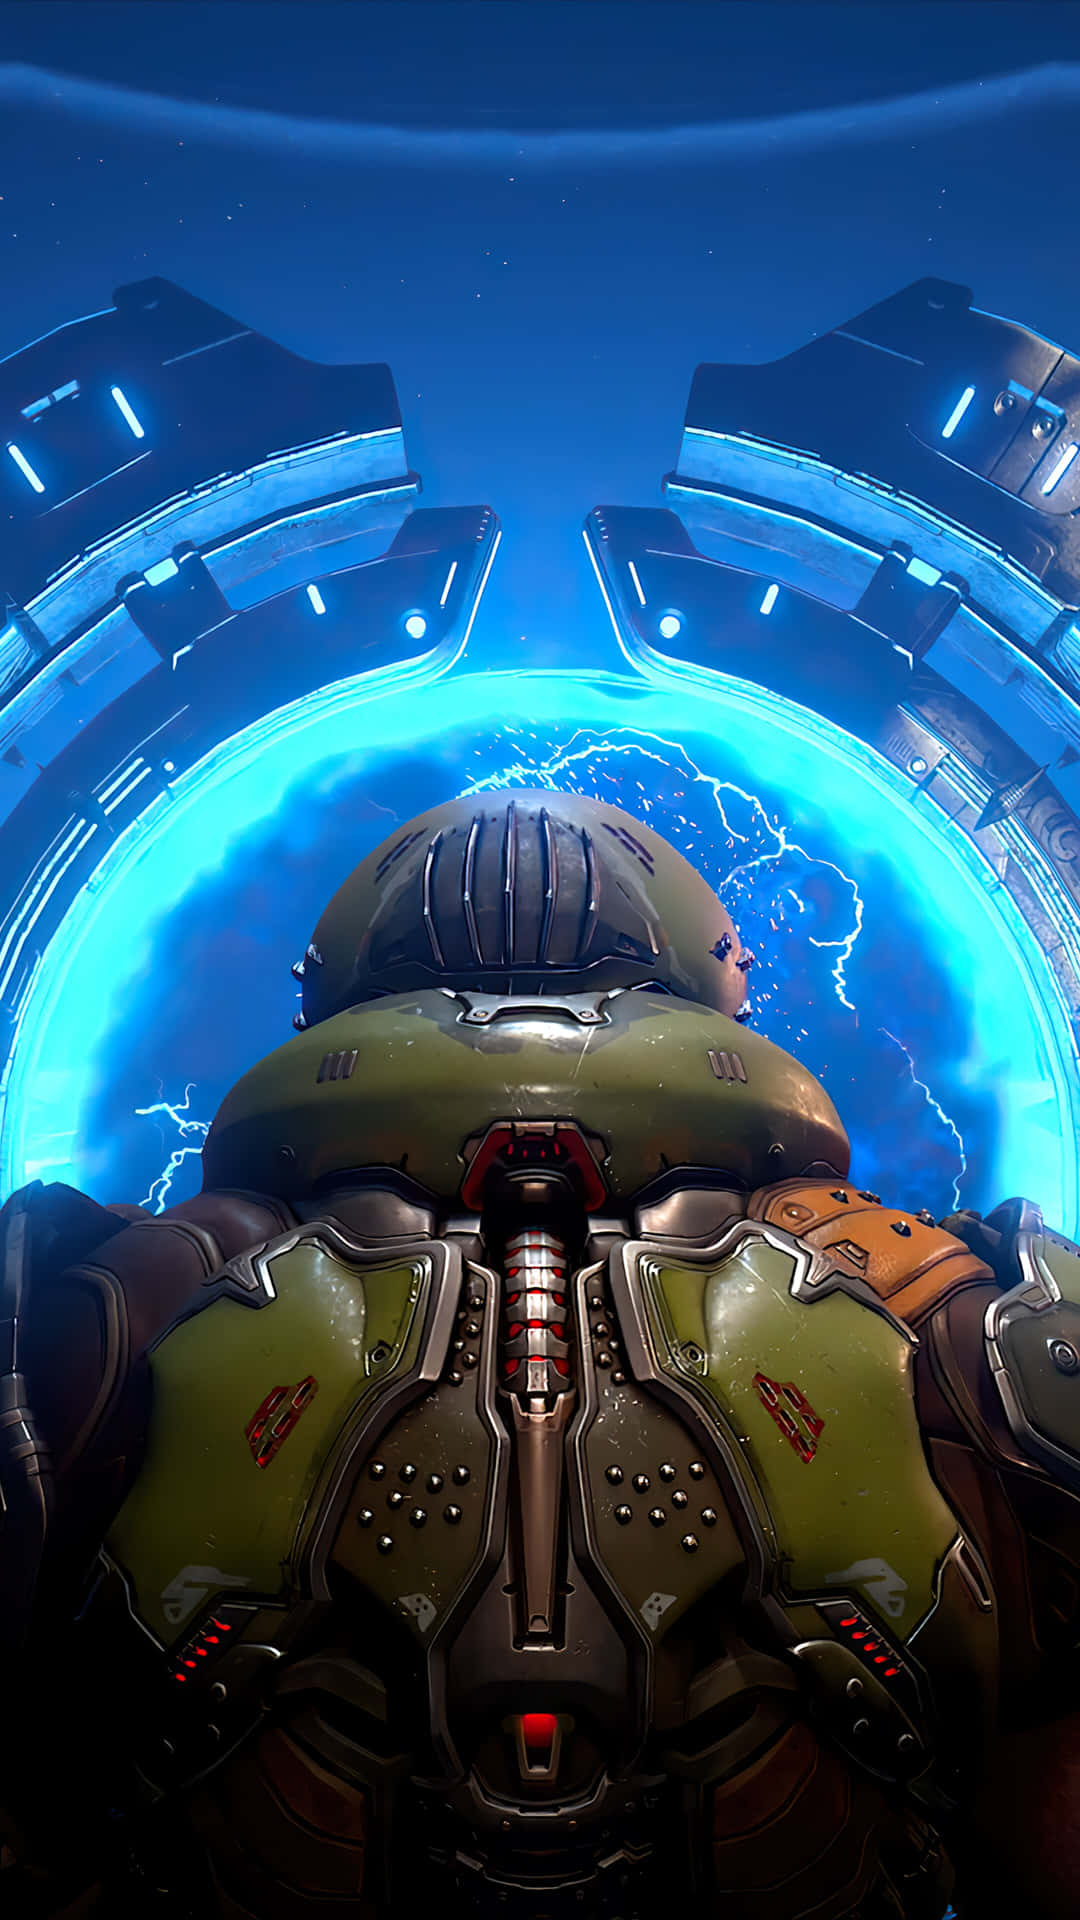 A riveting snapshot from the Doom Eternal game playing on an iPhone Wallpaper